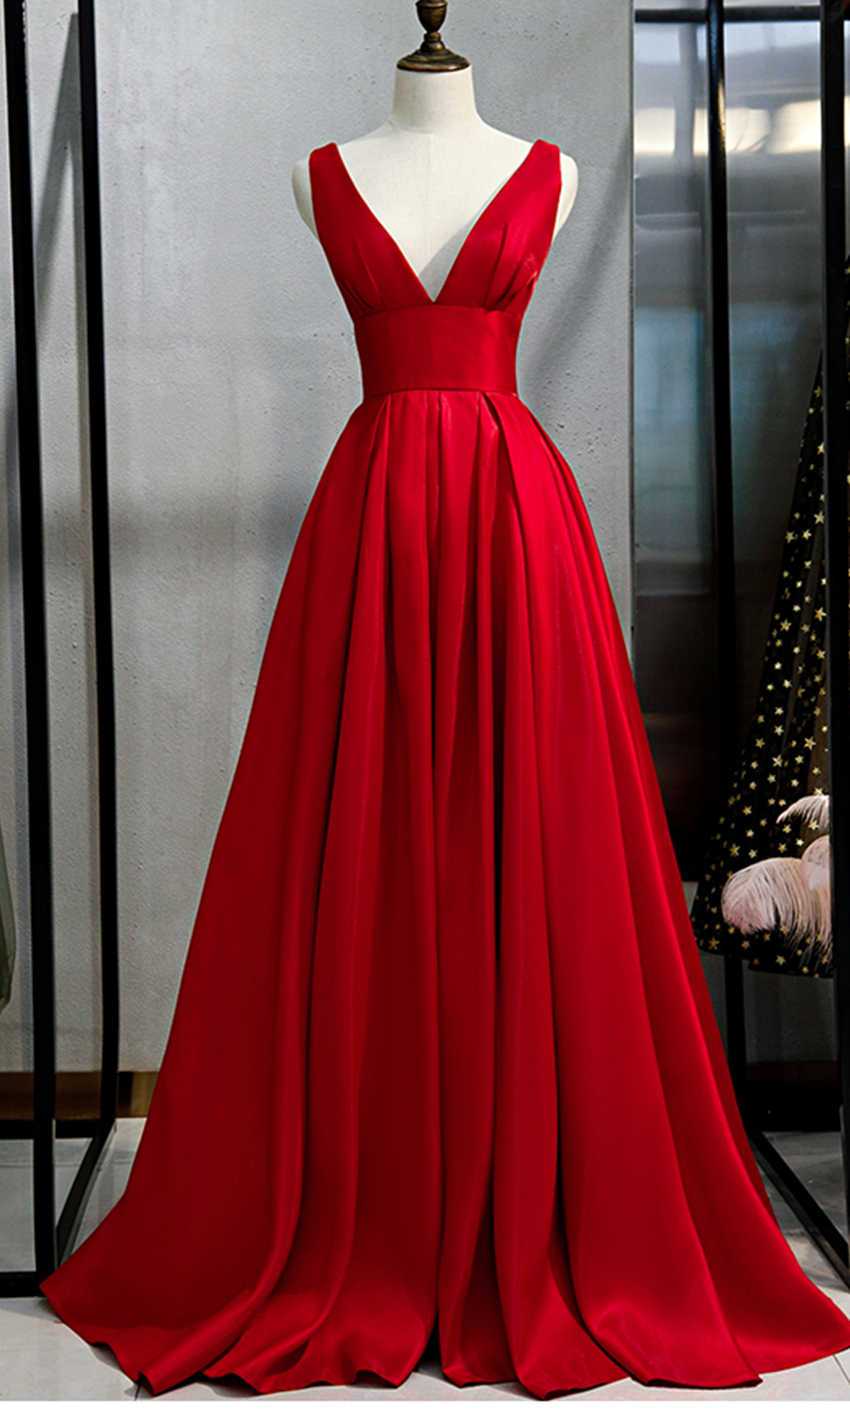 simple yet chic red prom dresses